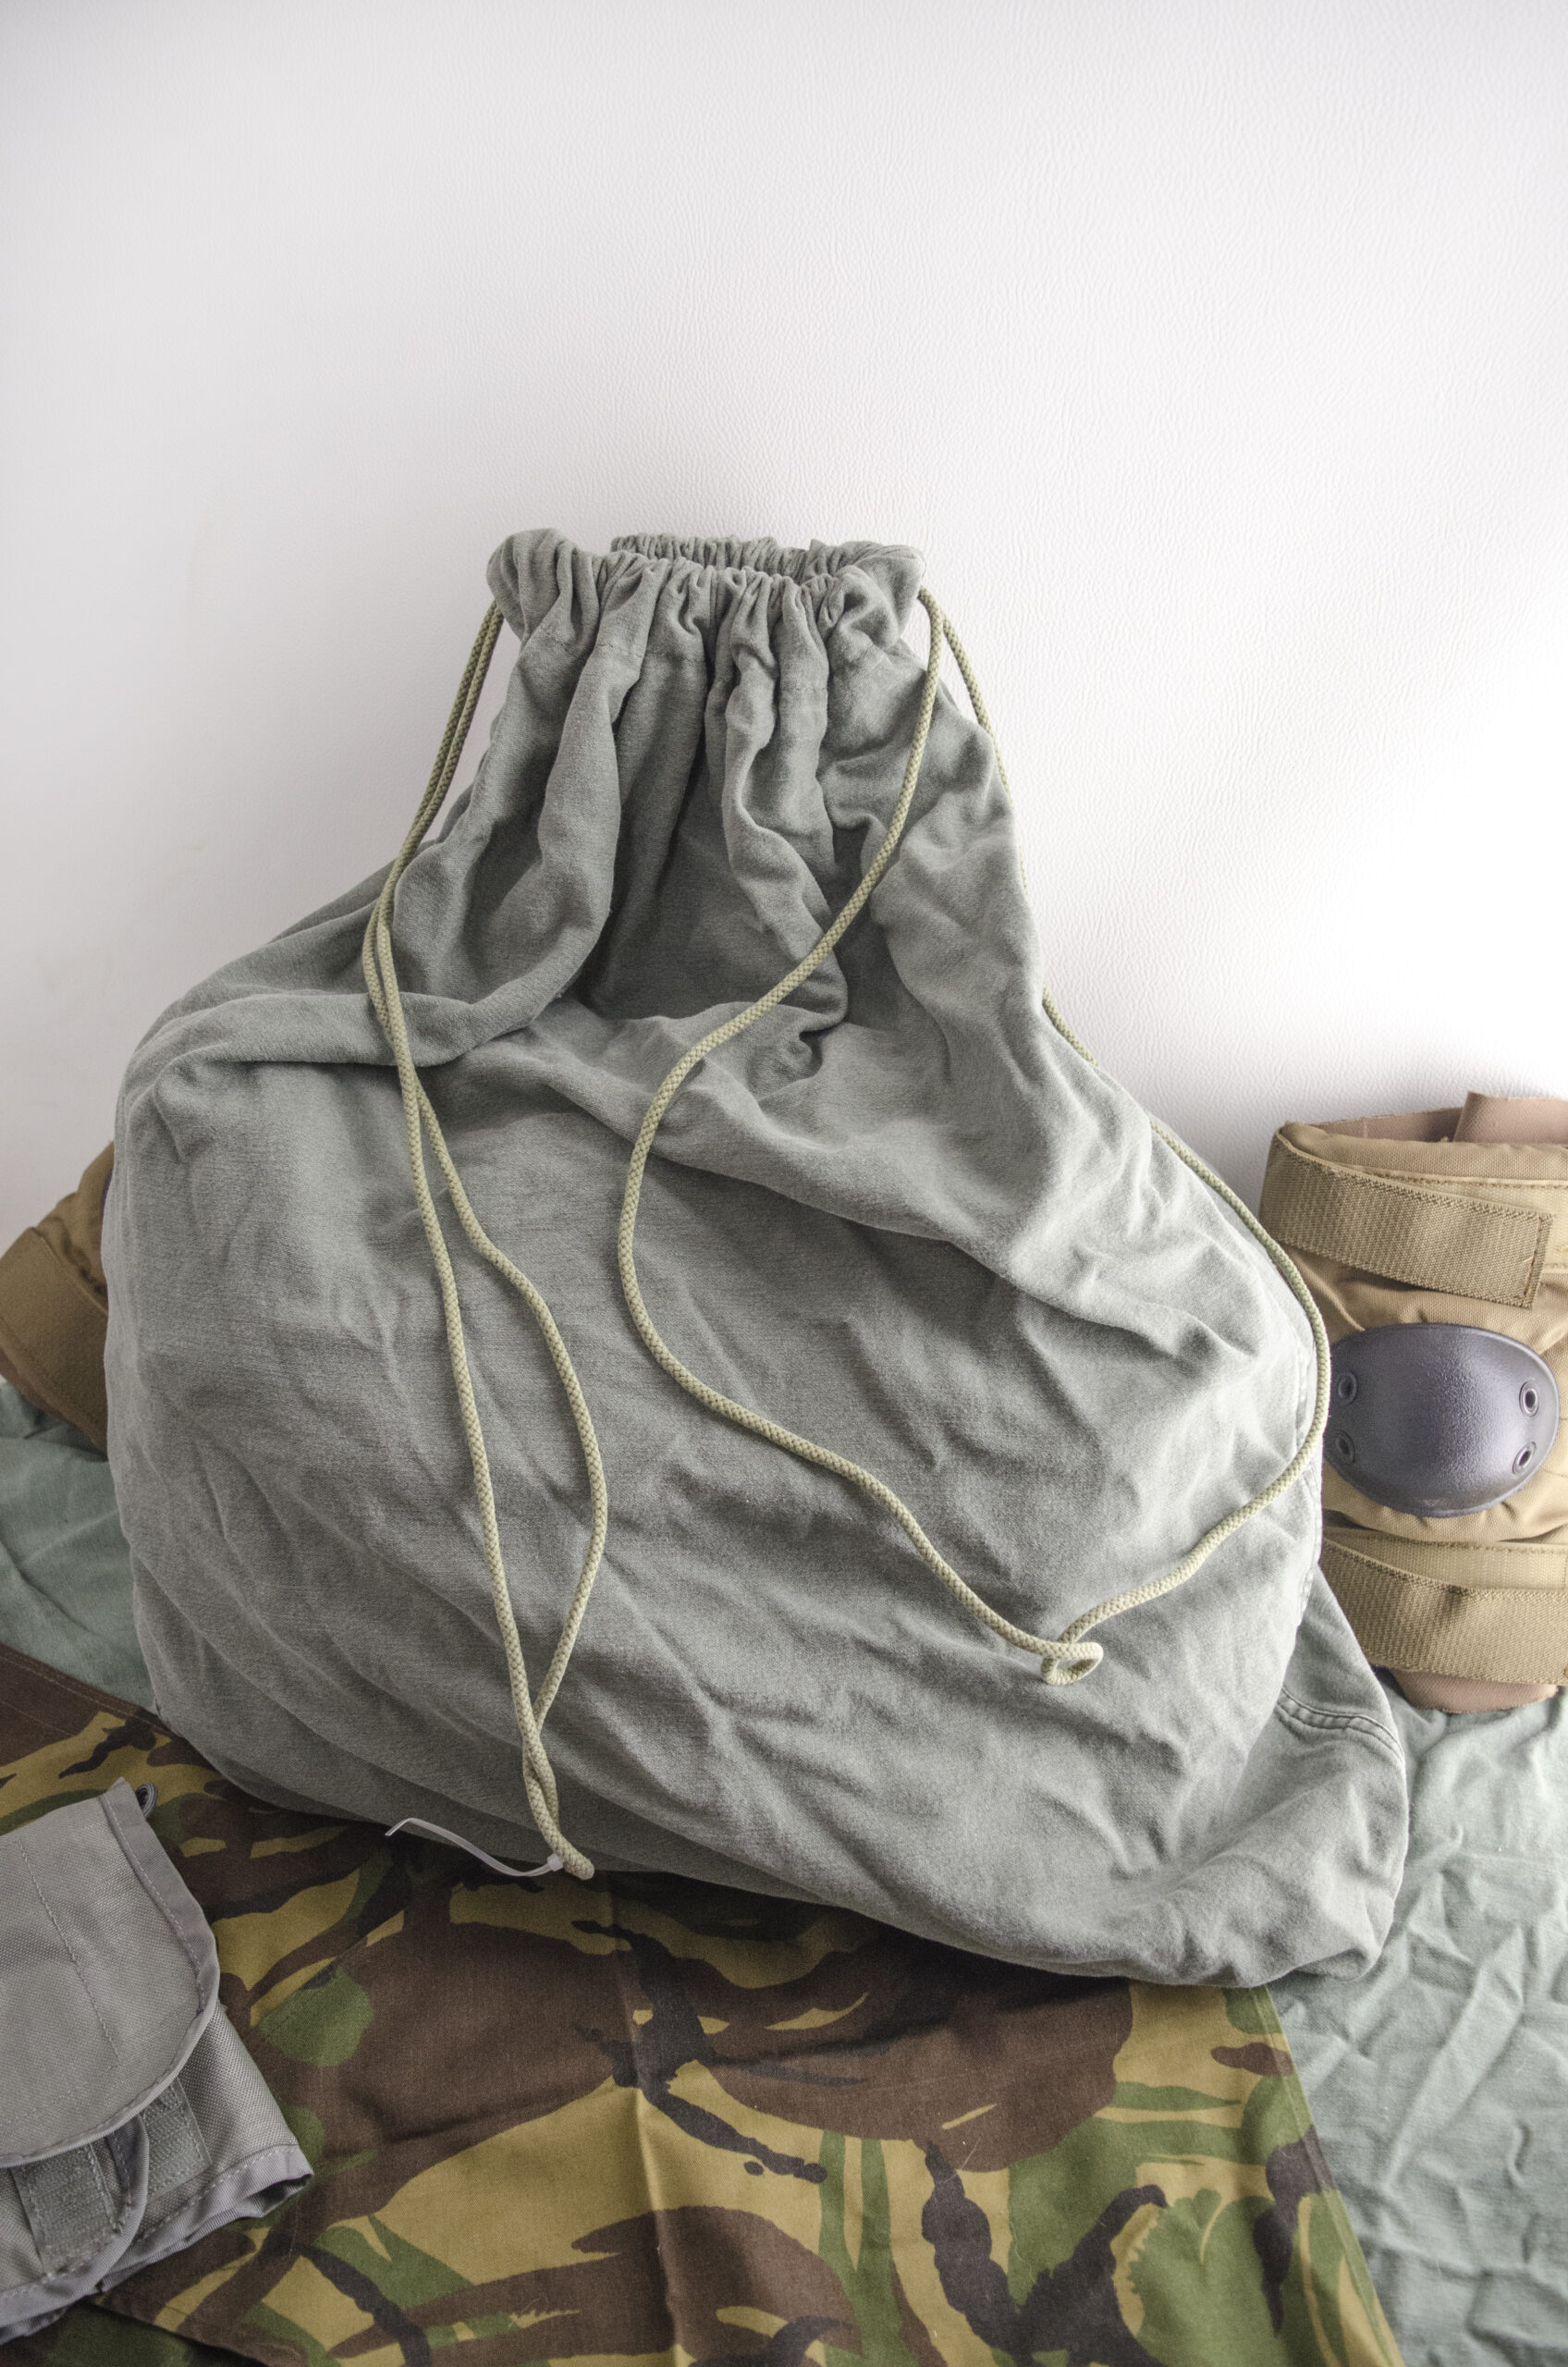 laundry Bag US – Army Truck Tom